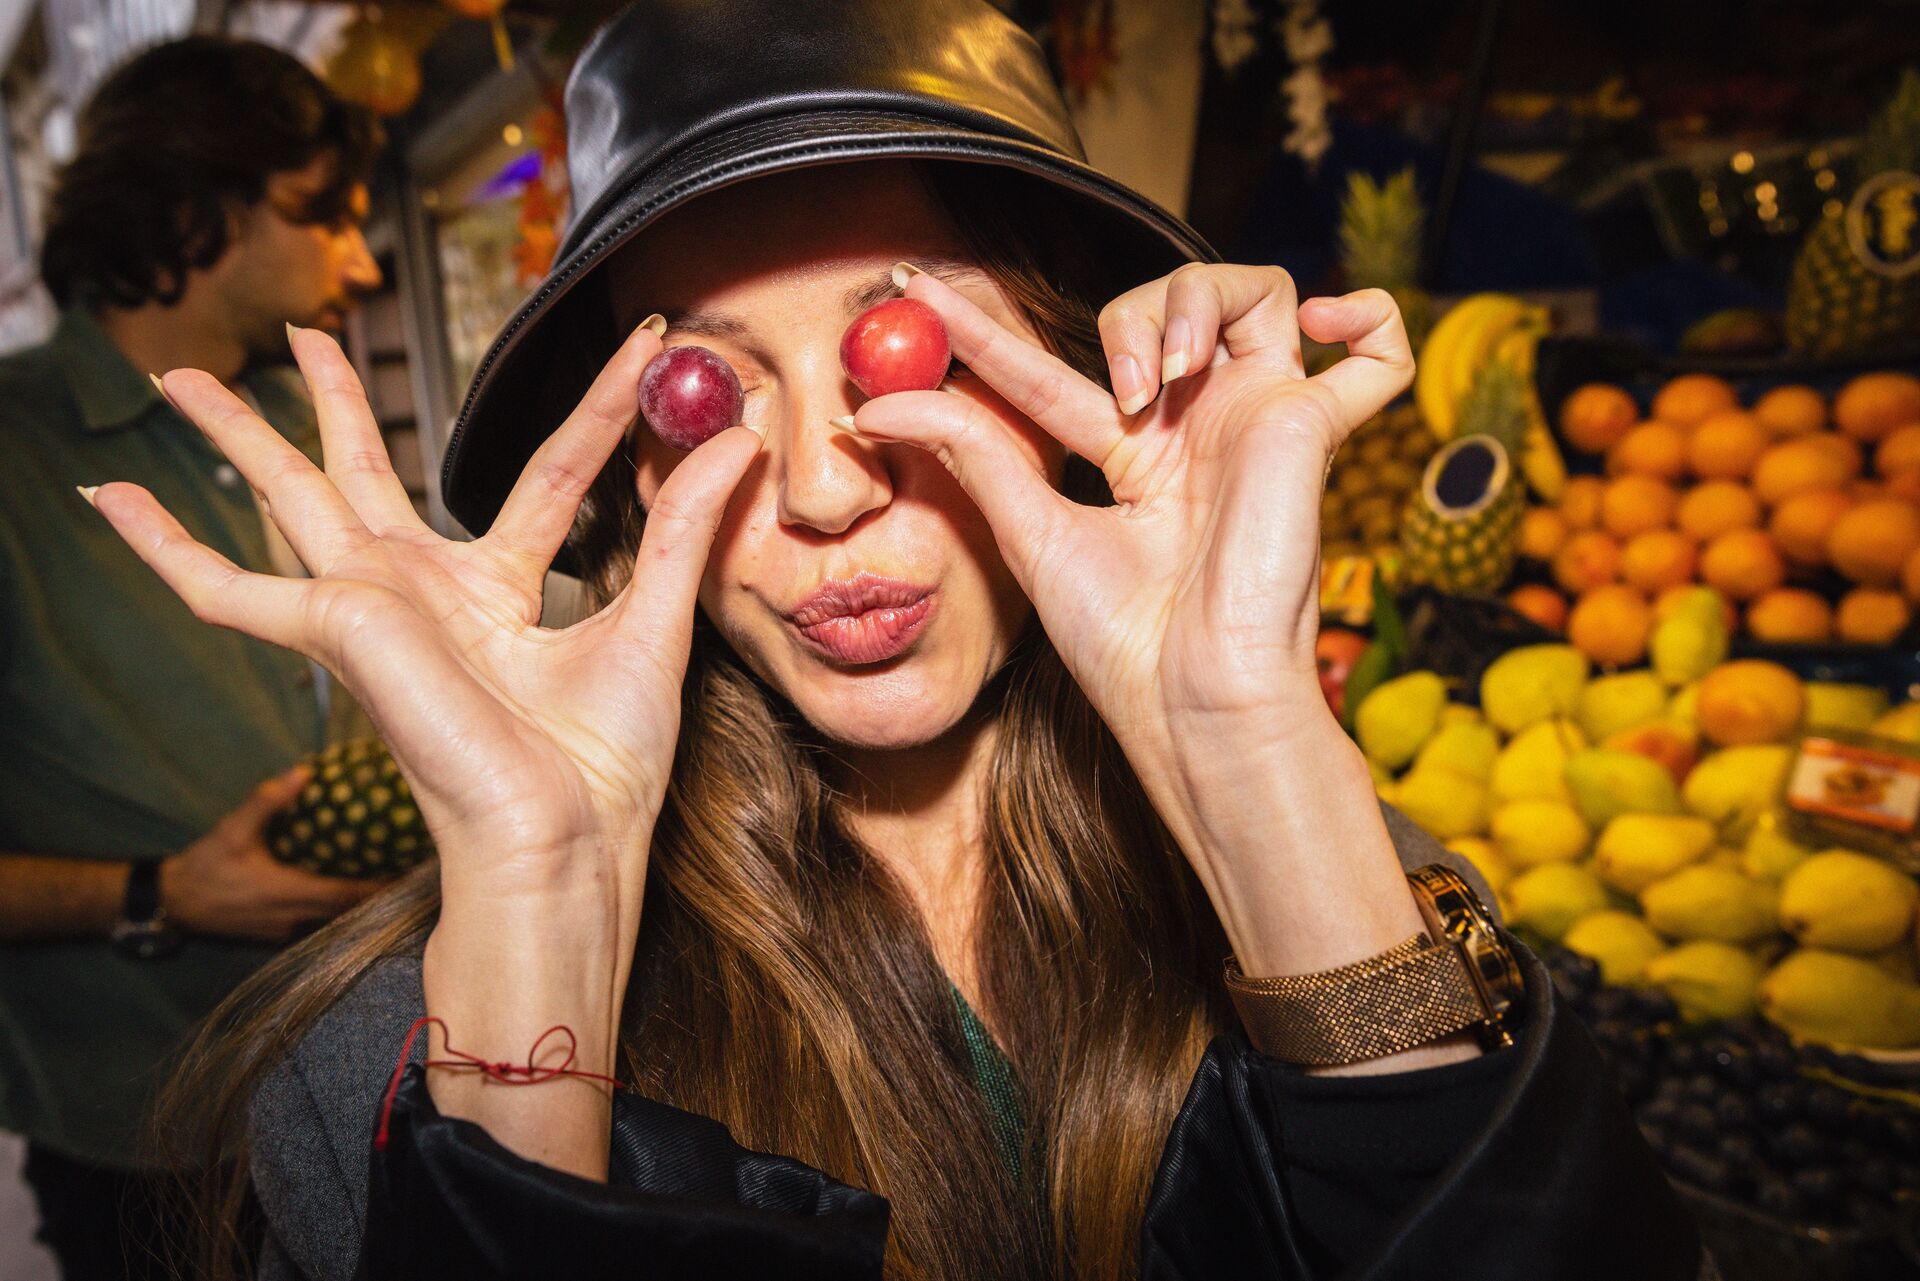 Large_MS PPT_Web-Woman with a hat holding grapes in front of her eyes.jpg